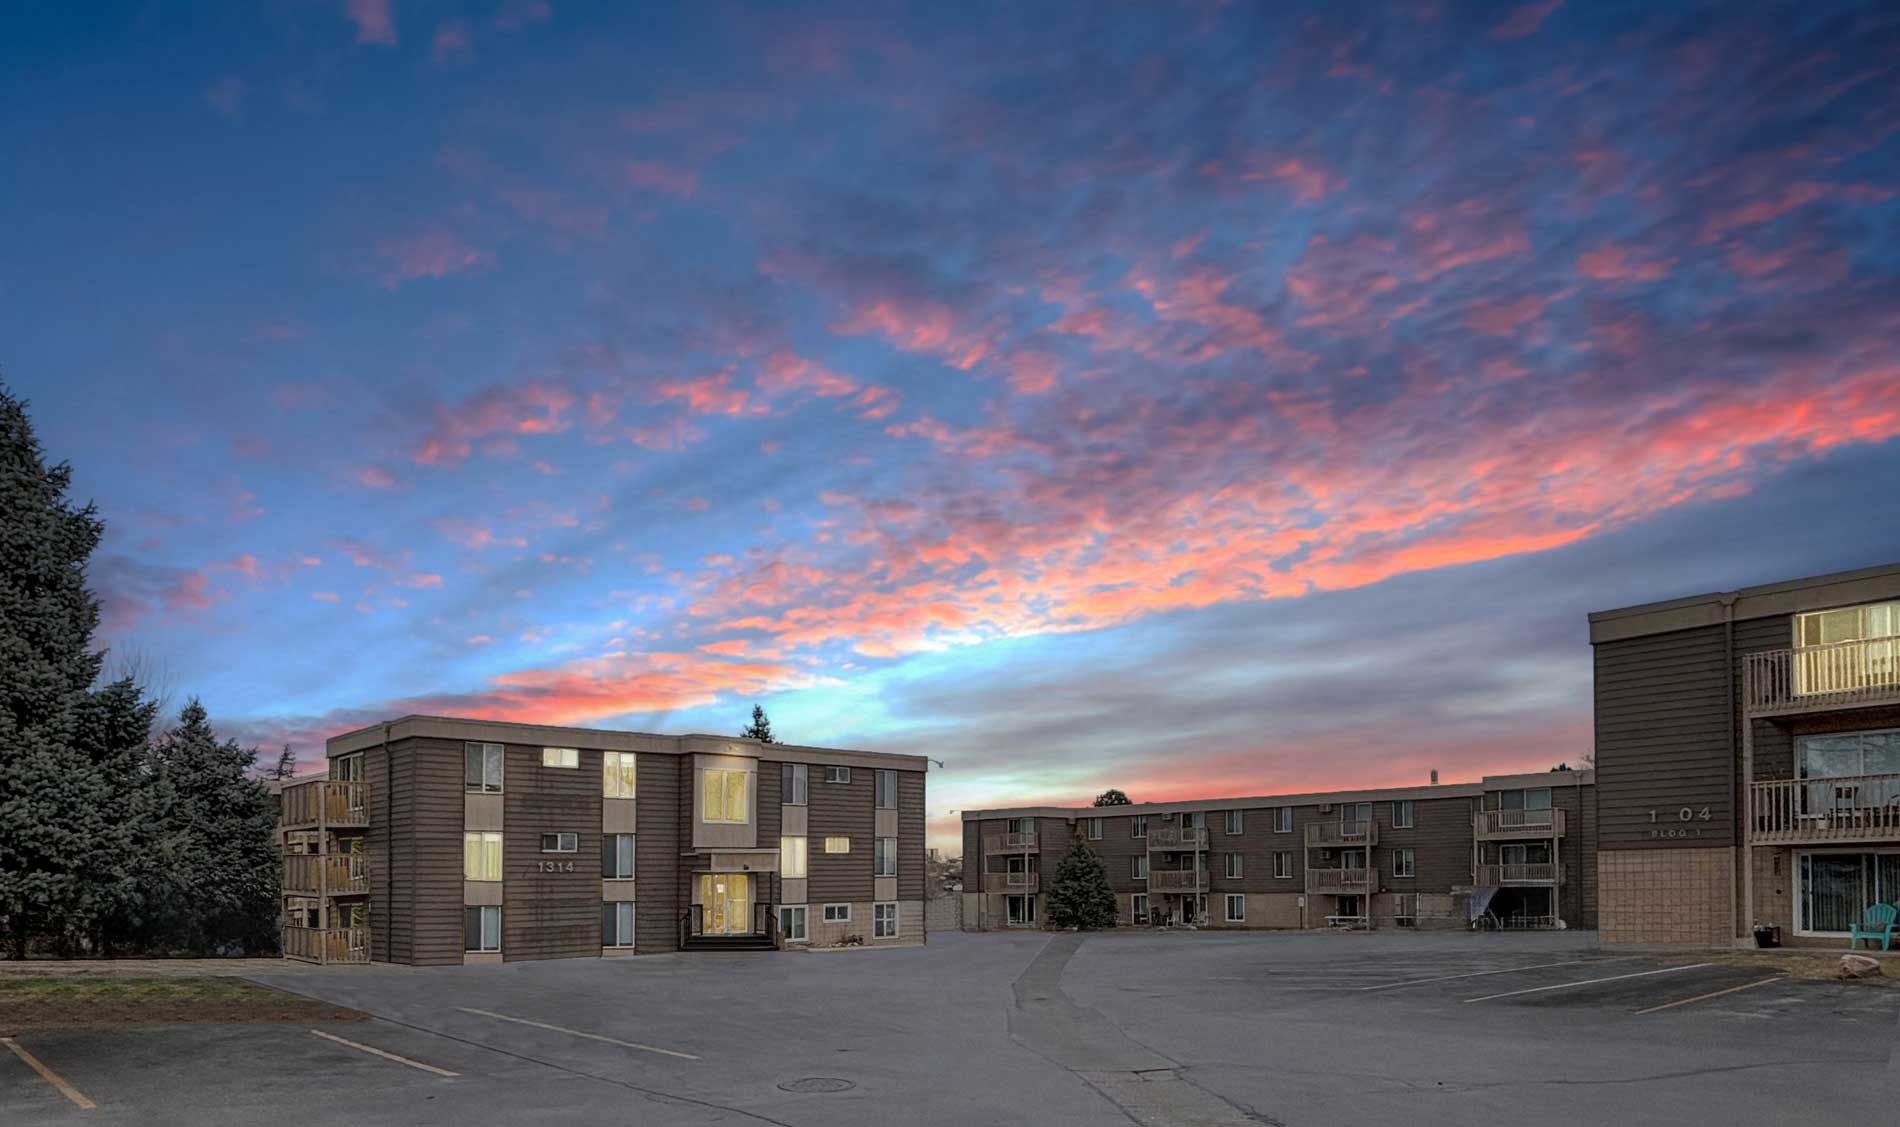 Studio, 1, 2, and 3-bedroom Apartments for Rent in Rapid City, SD